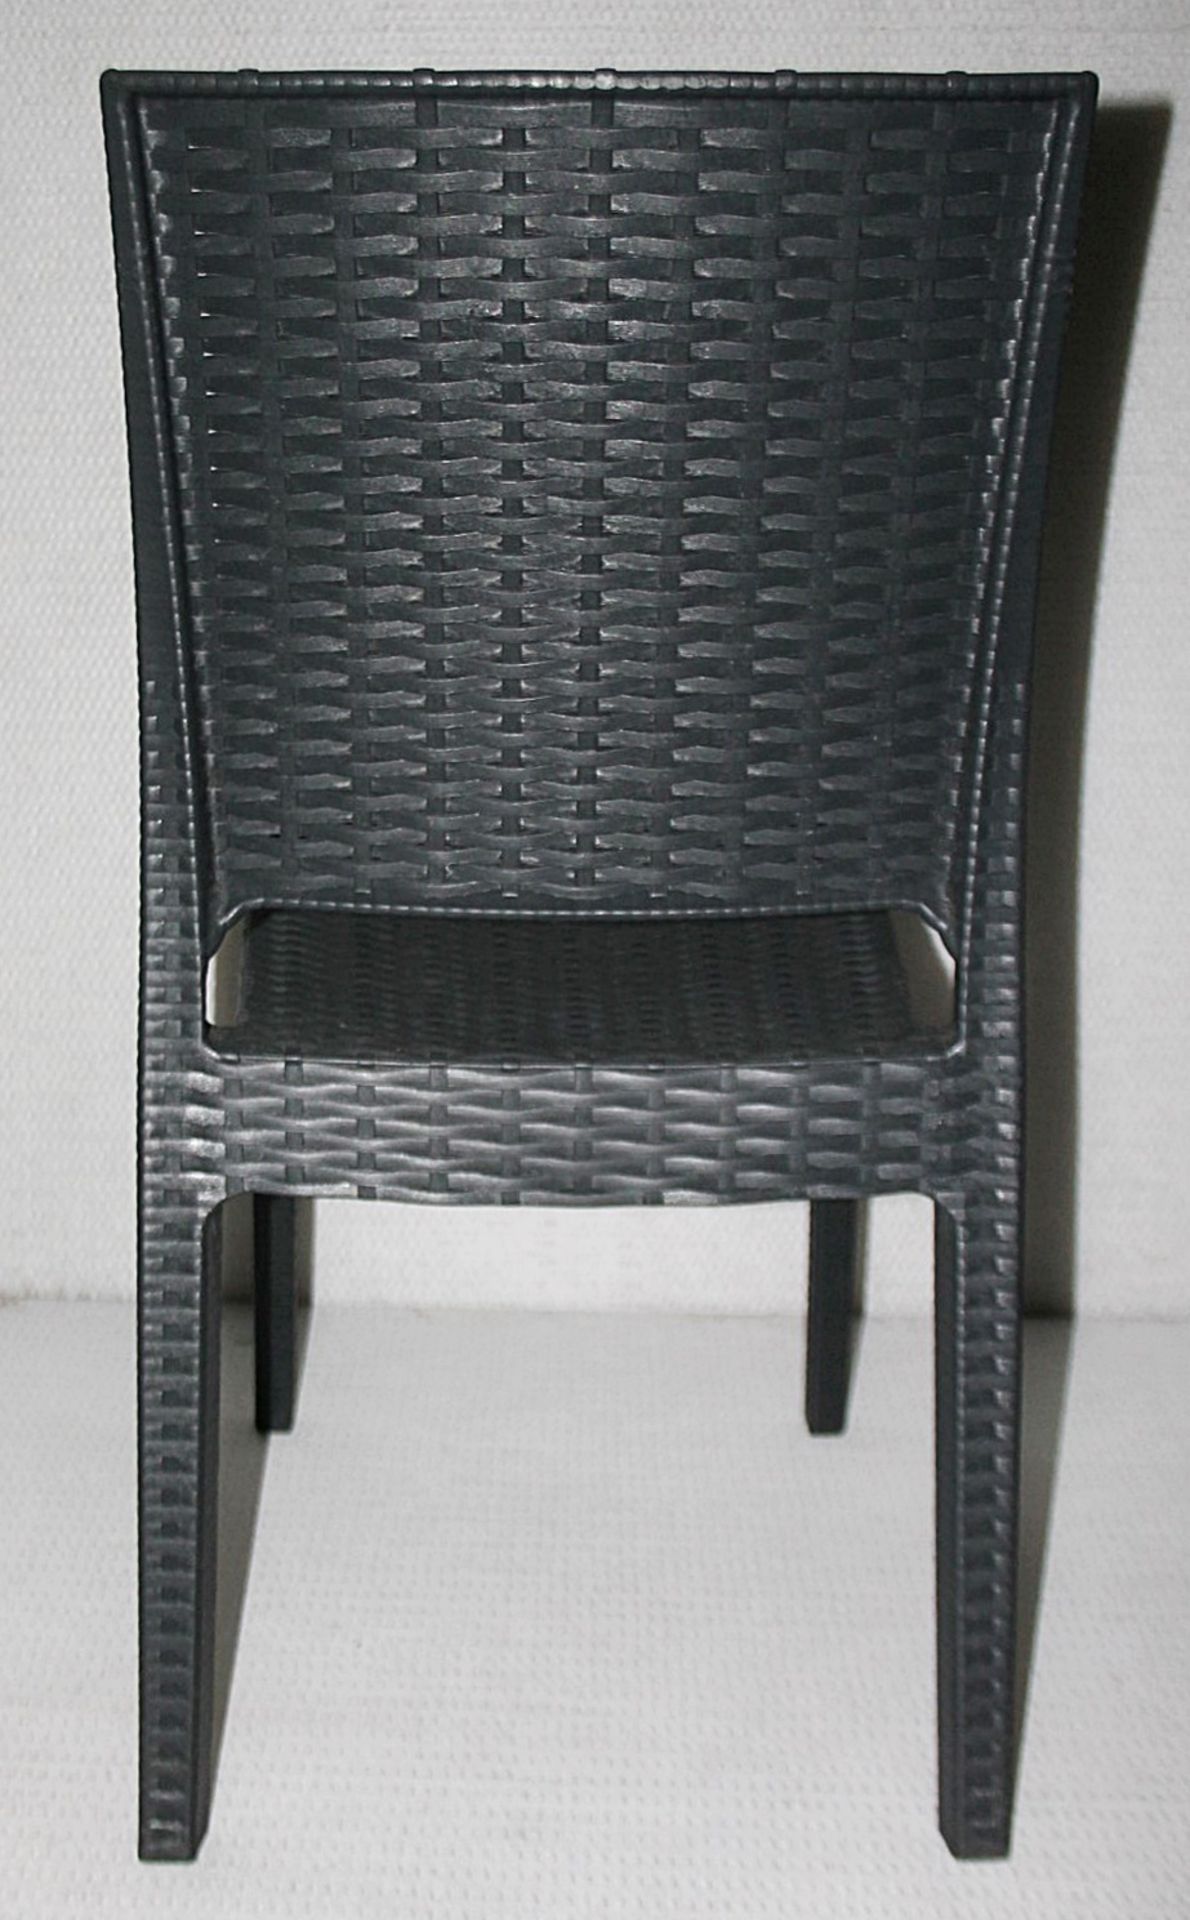 8 x SIESTA EXCLUSIVE 'Florida' Commercial Stackable Rattan-style Chairs In Dark Grey - CL987 - - Image 6 of 13